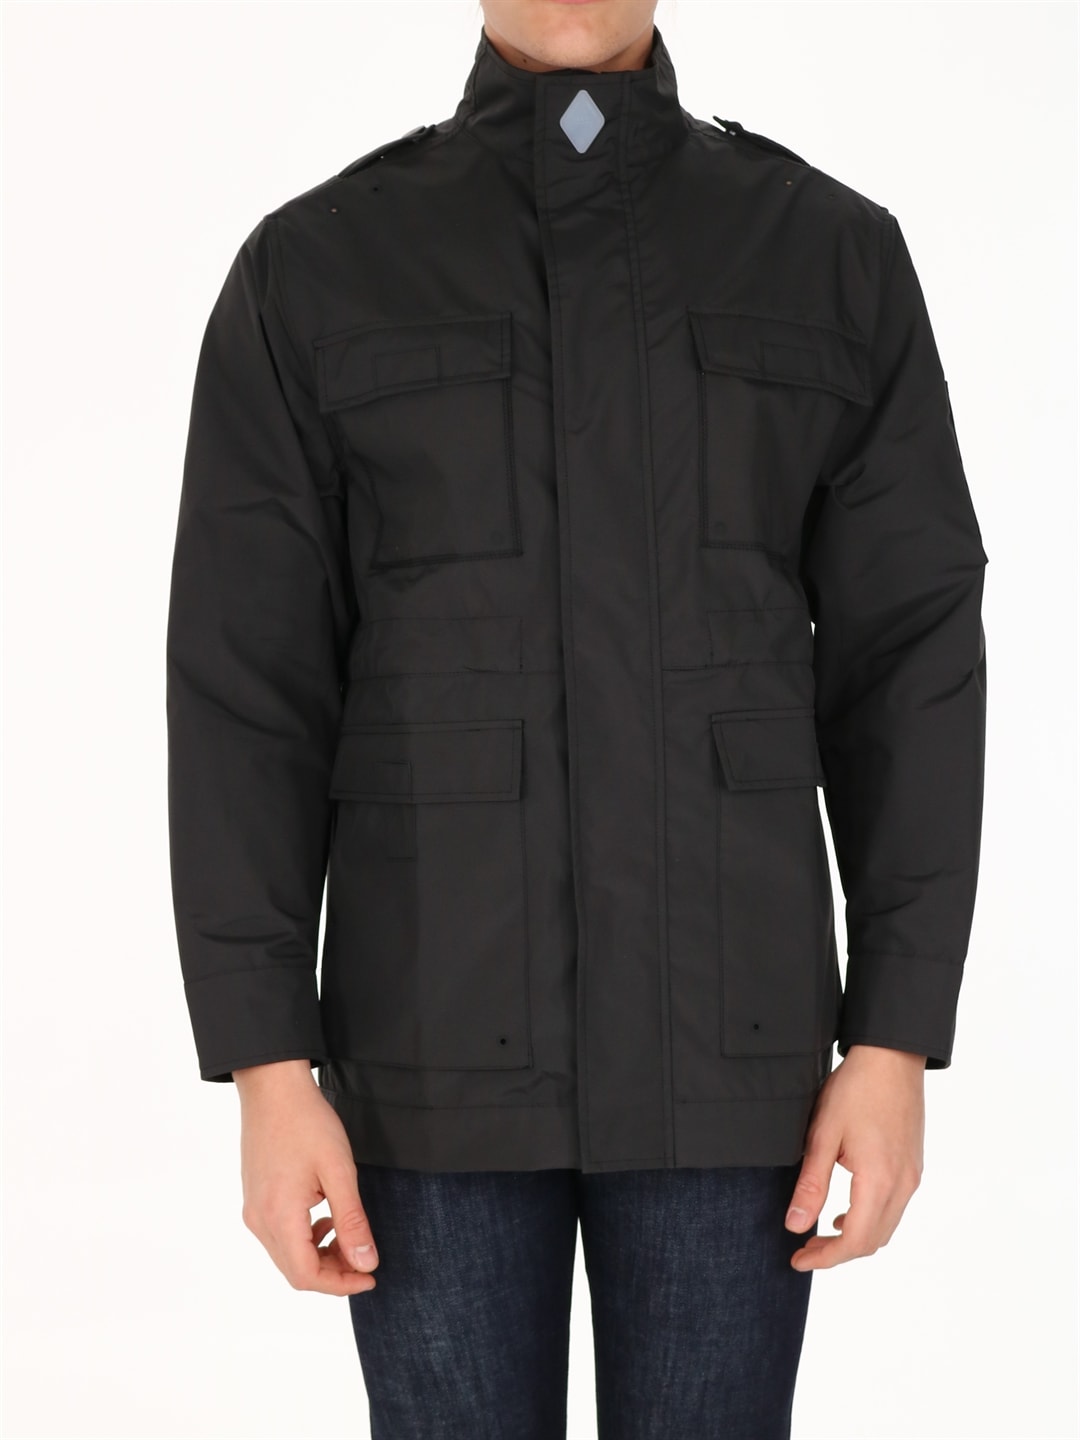 A-COLD-WALL Windproof Jacket 4 Pockets Black